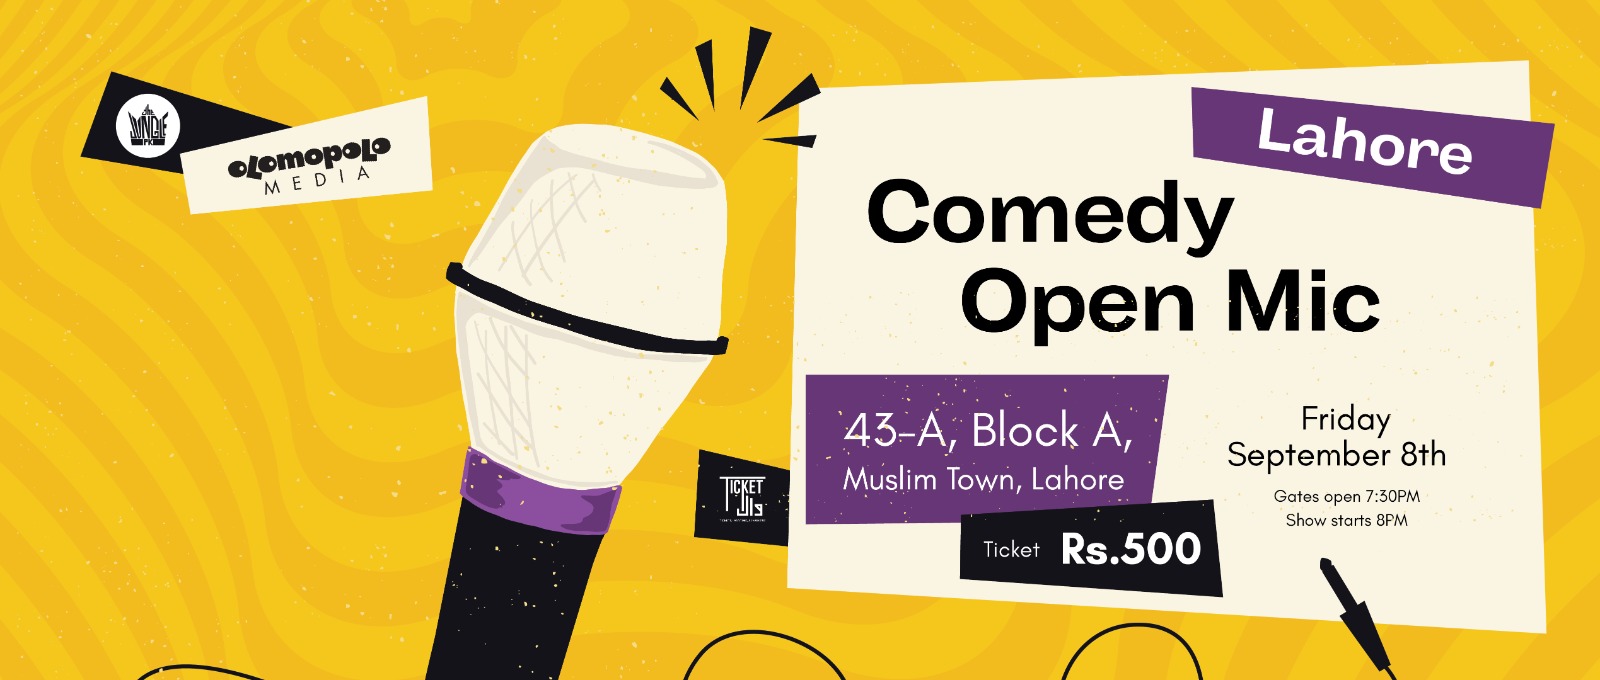 Comedy open mic Lahore